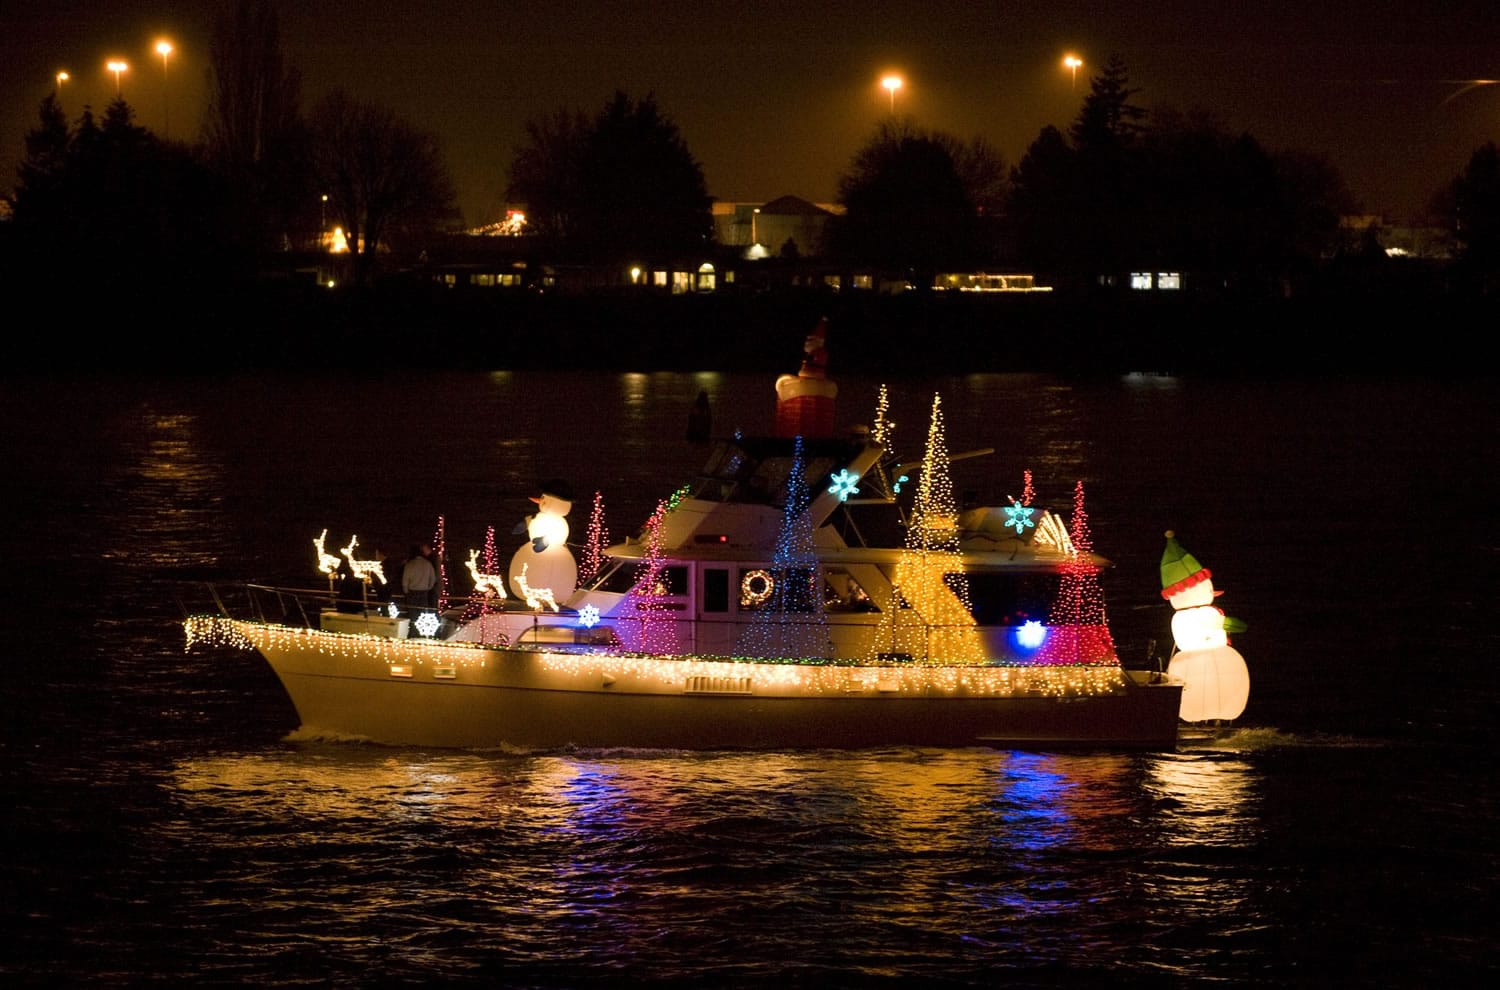 Viewing locations and more information about the parade are available at http://www.christmasships.org.